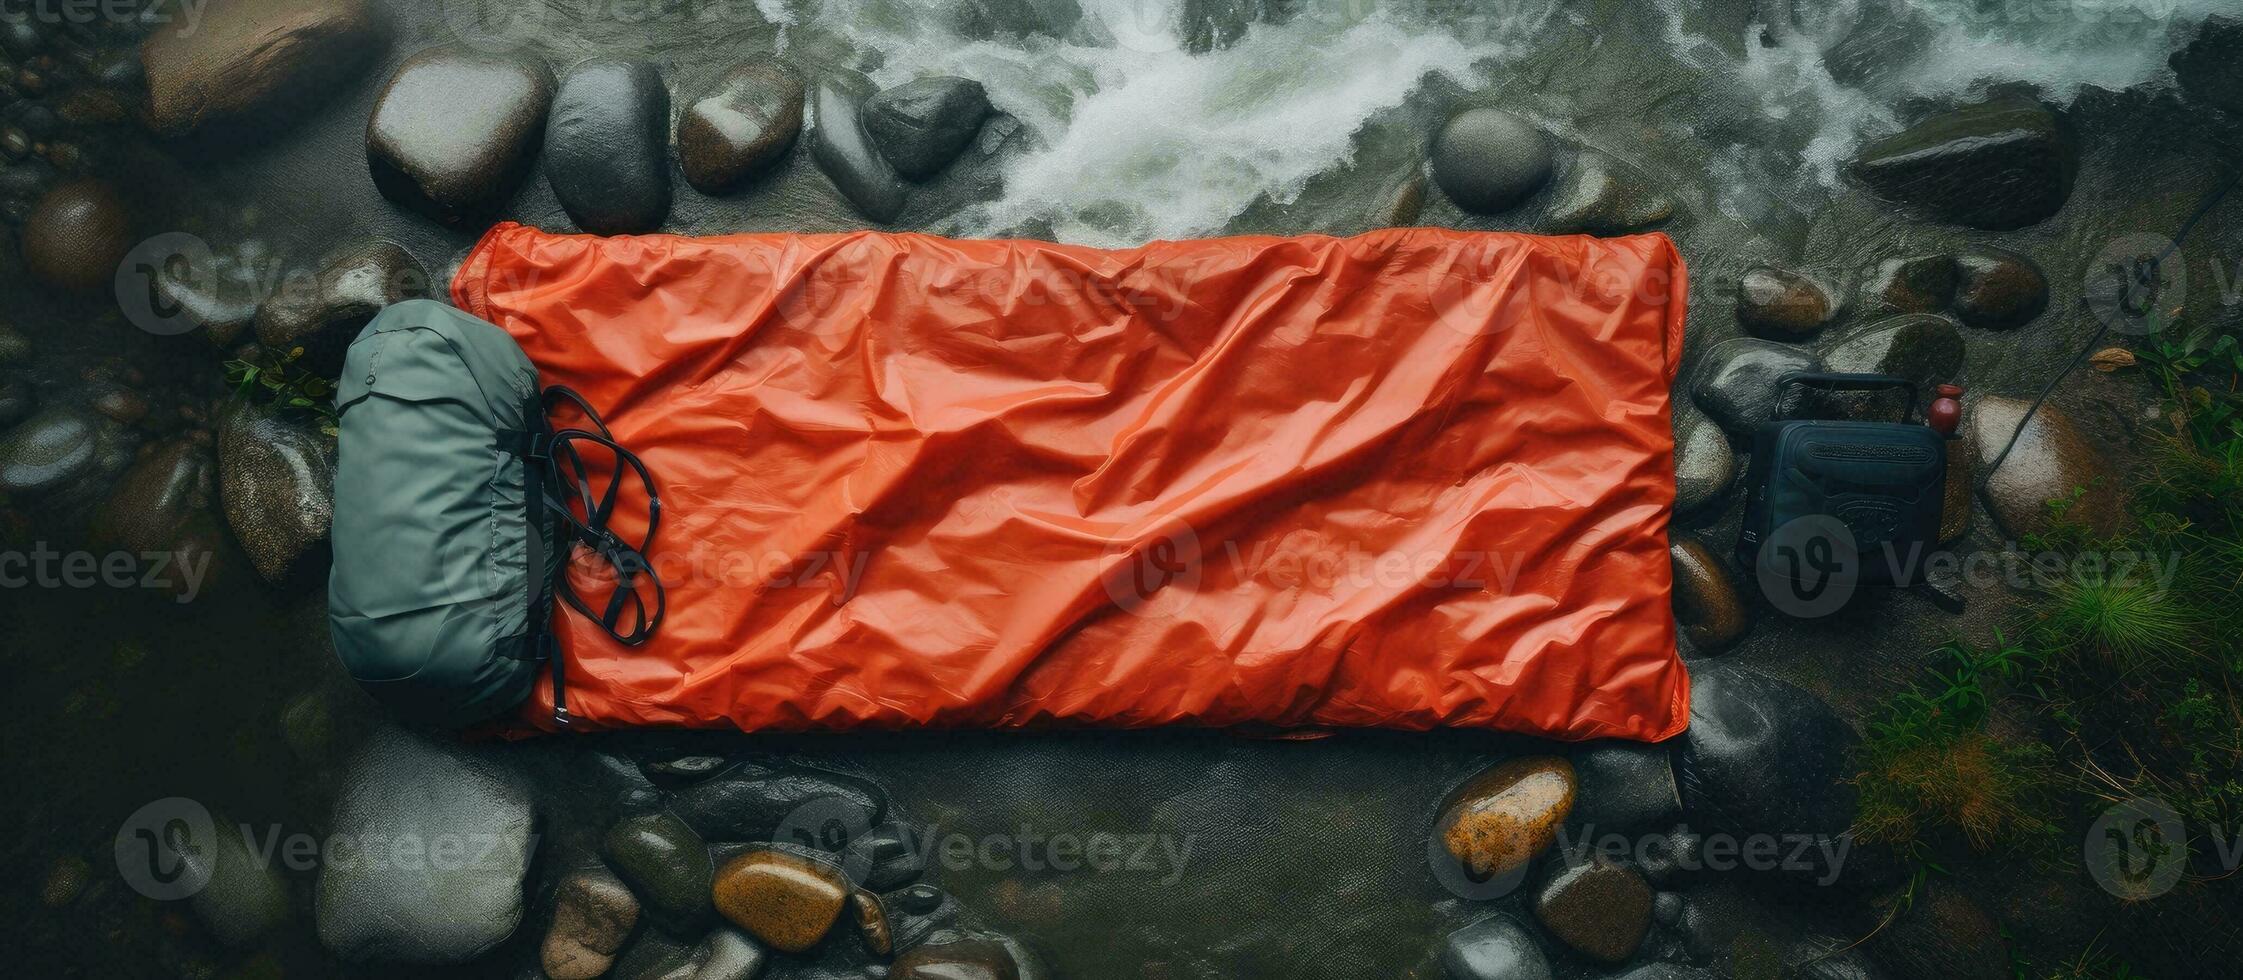 Photo of an orange sleeping bag on a rocky beach, with plenty of space for relaxation and solitude with copy space